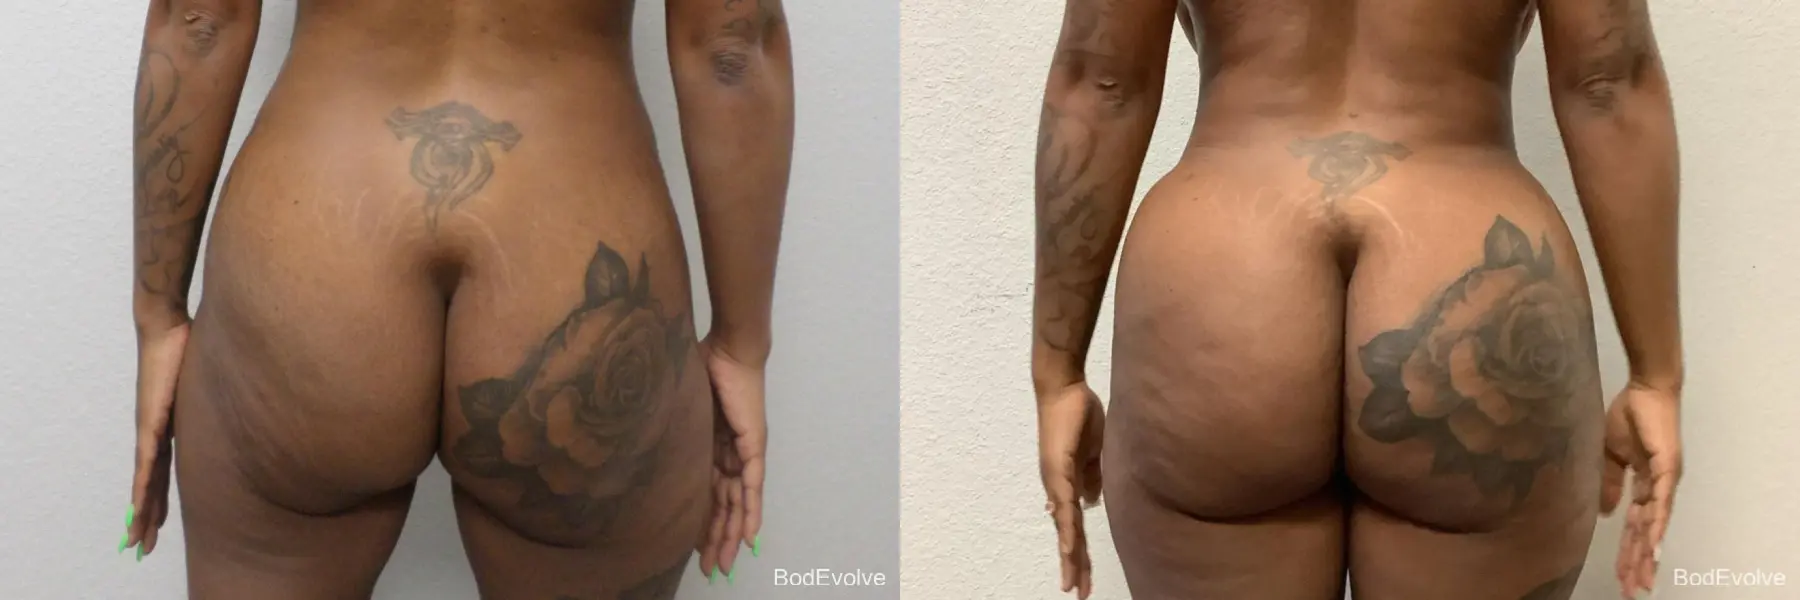 Brazilian Butt Lift: Patient 1 - Before and After 4